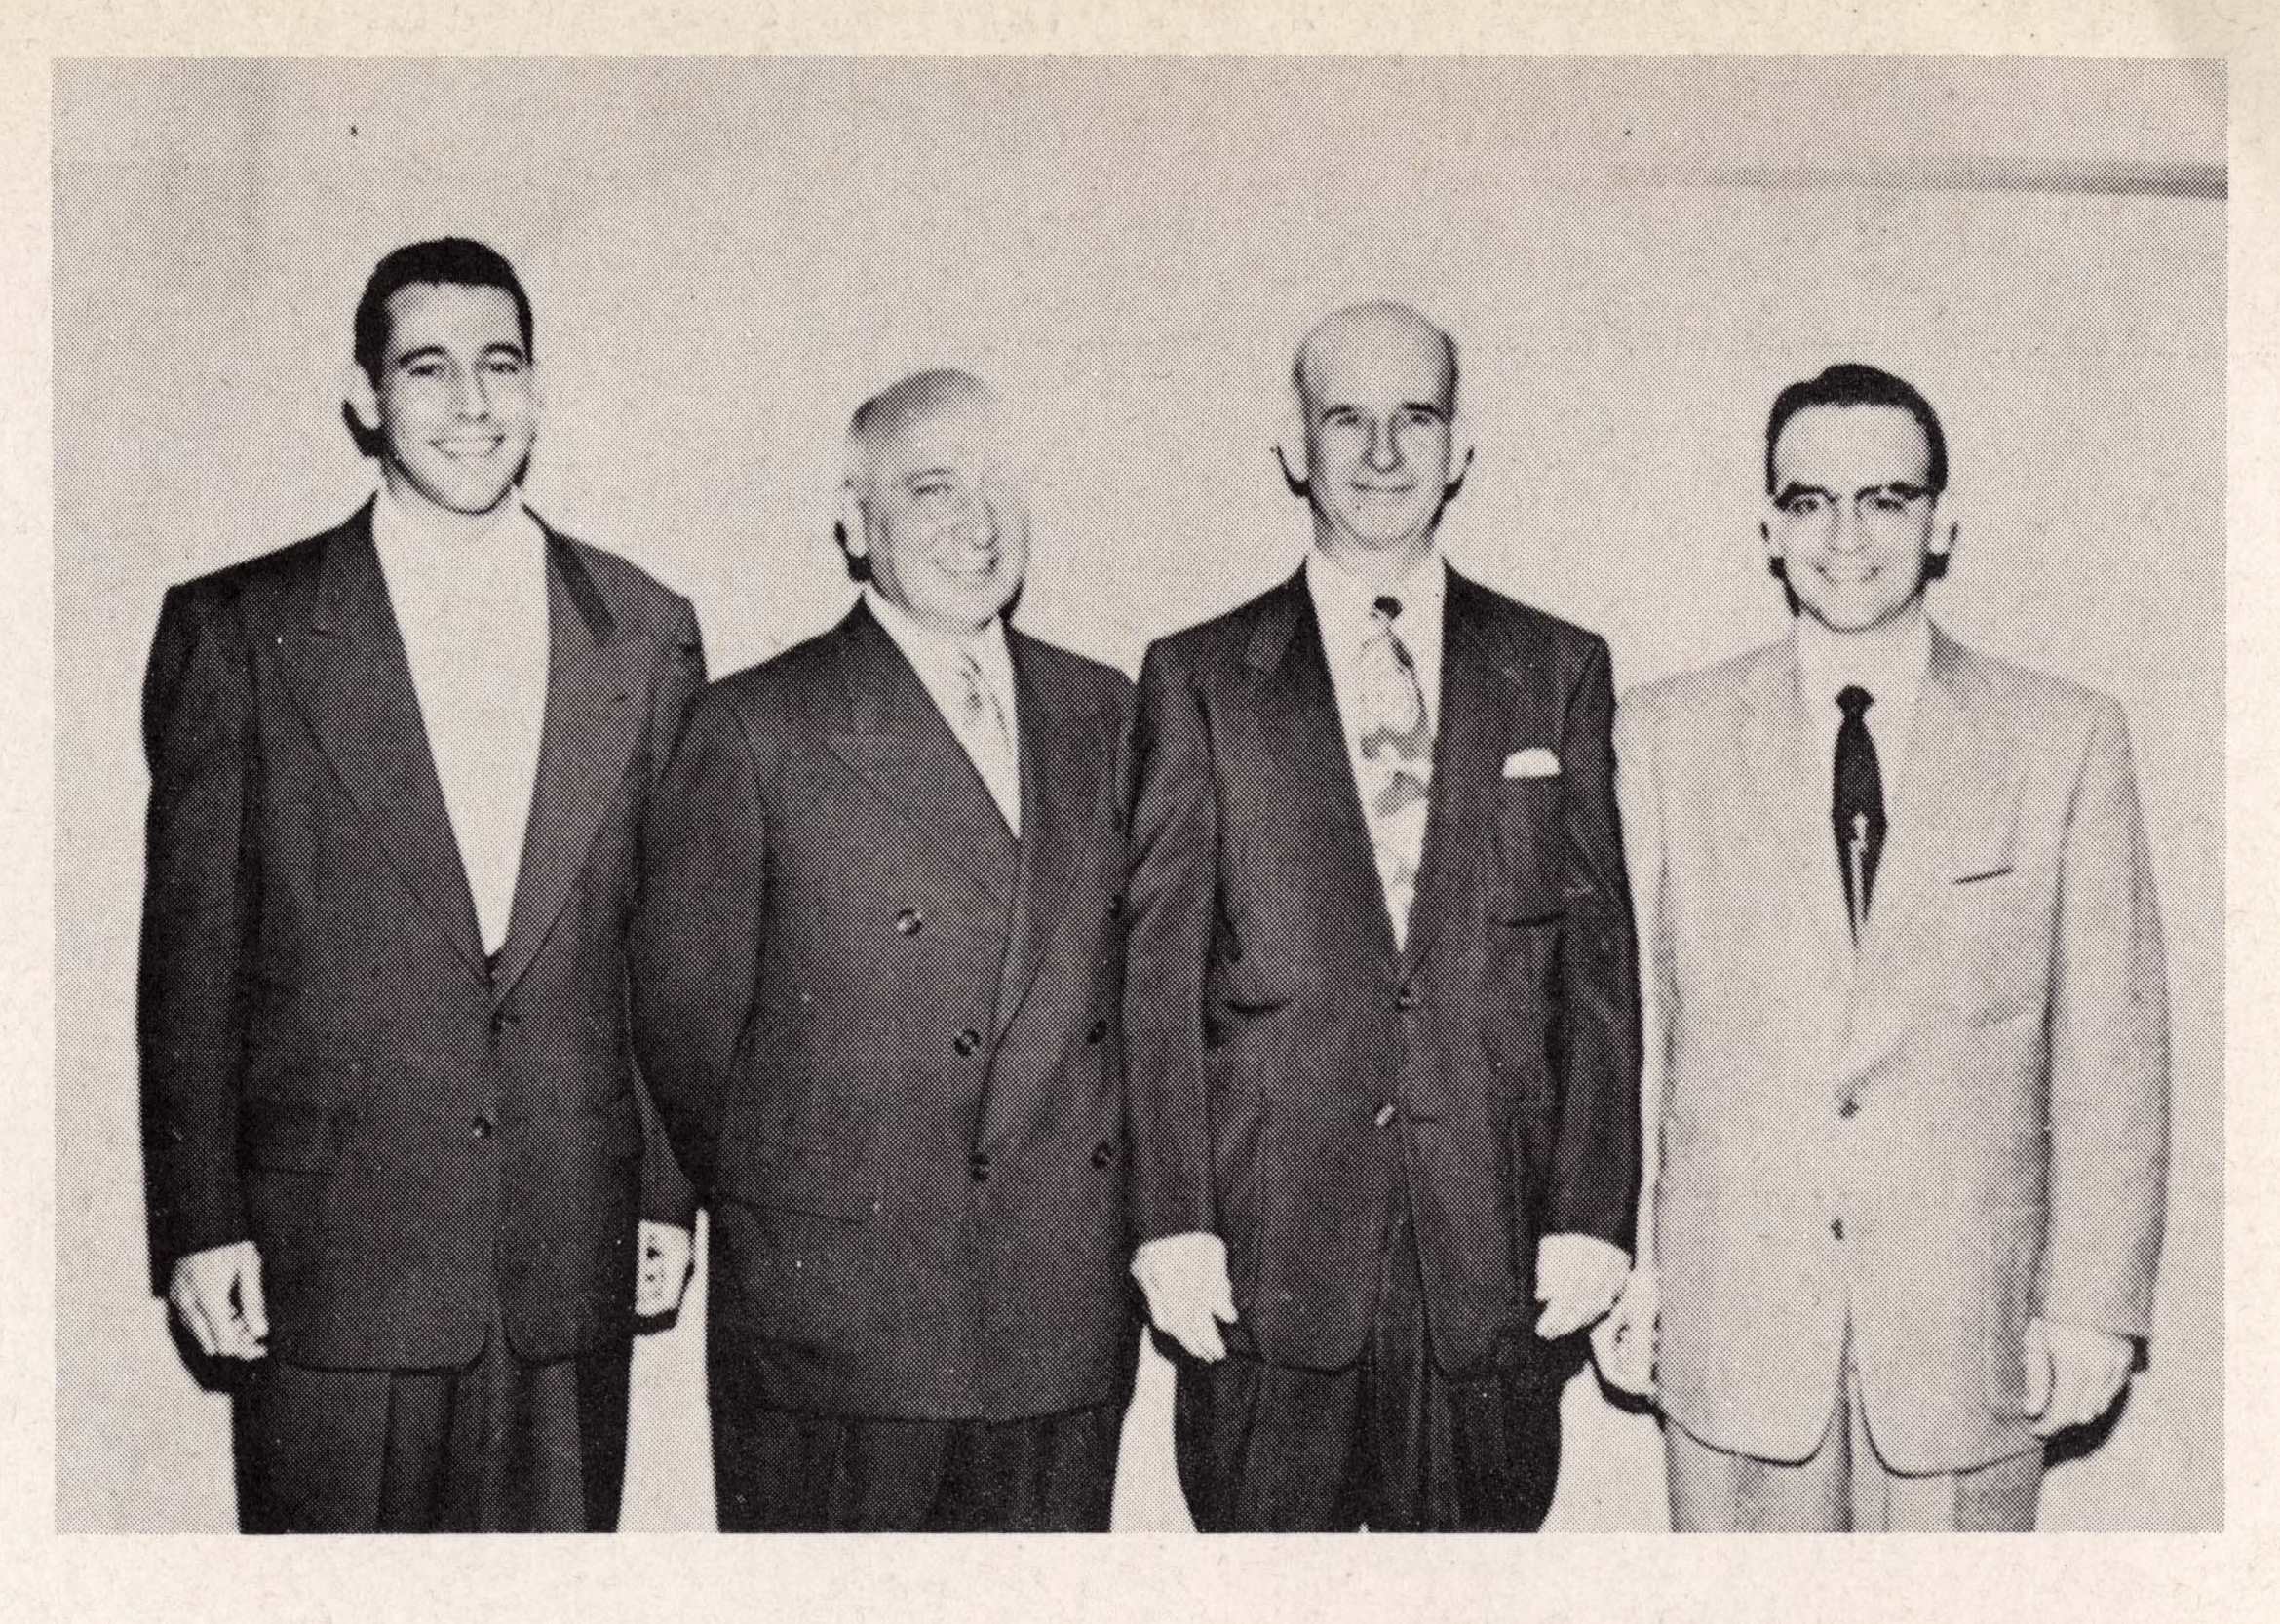 Father and son teams: The Drs. Rizzolo, 1956 and 1925, and the Drs. Williamson, 1925 and 1956; all grads of what was then called Baylor University College of Medicine.